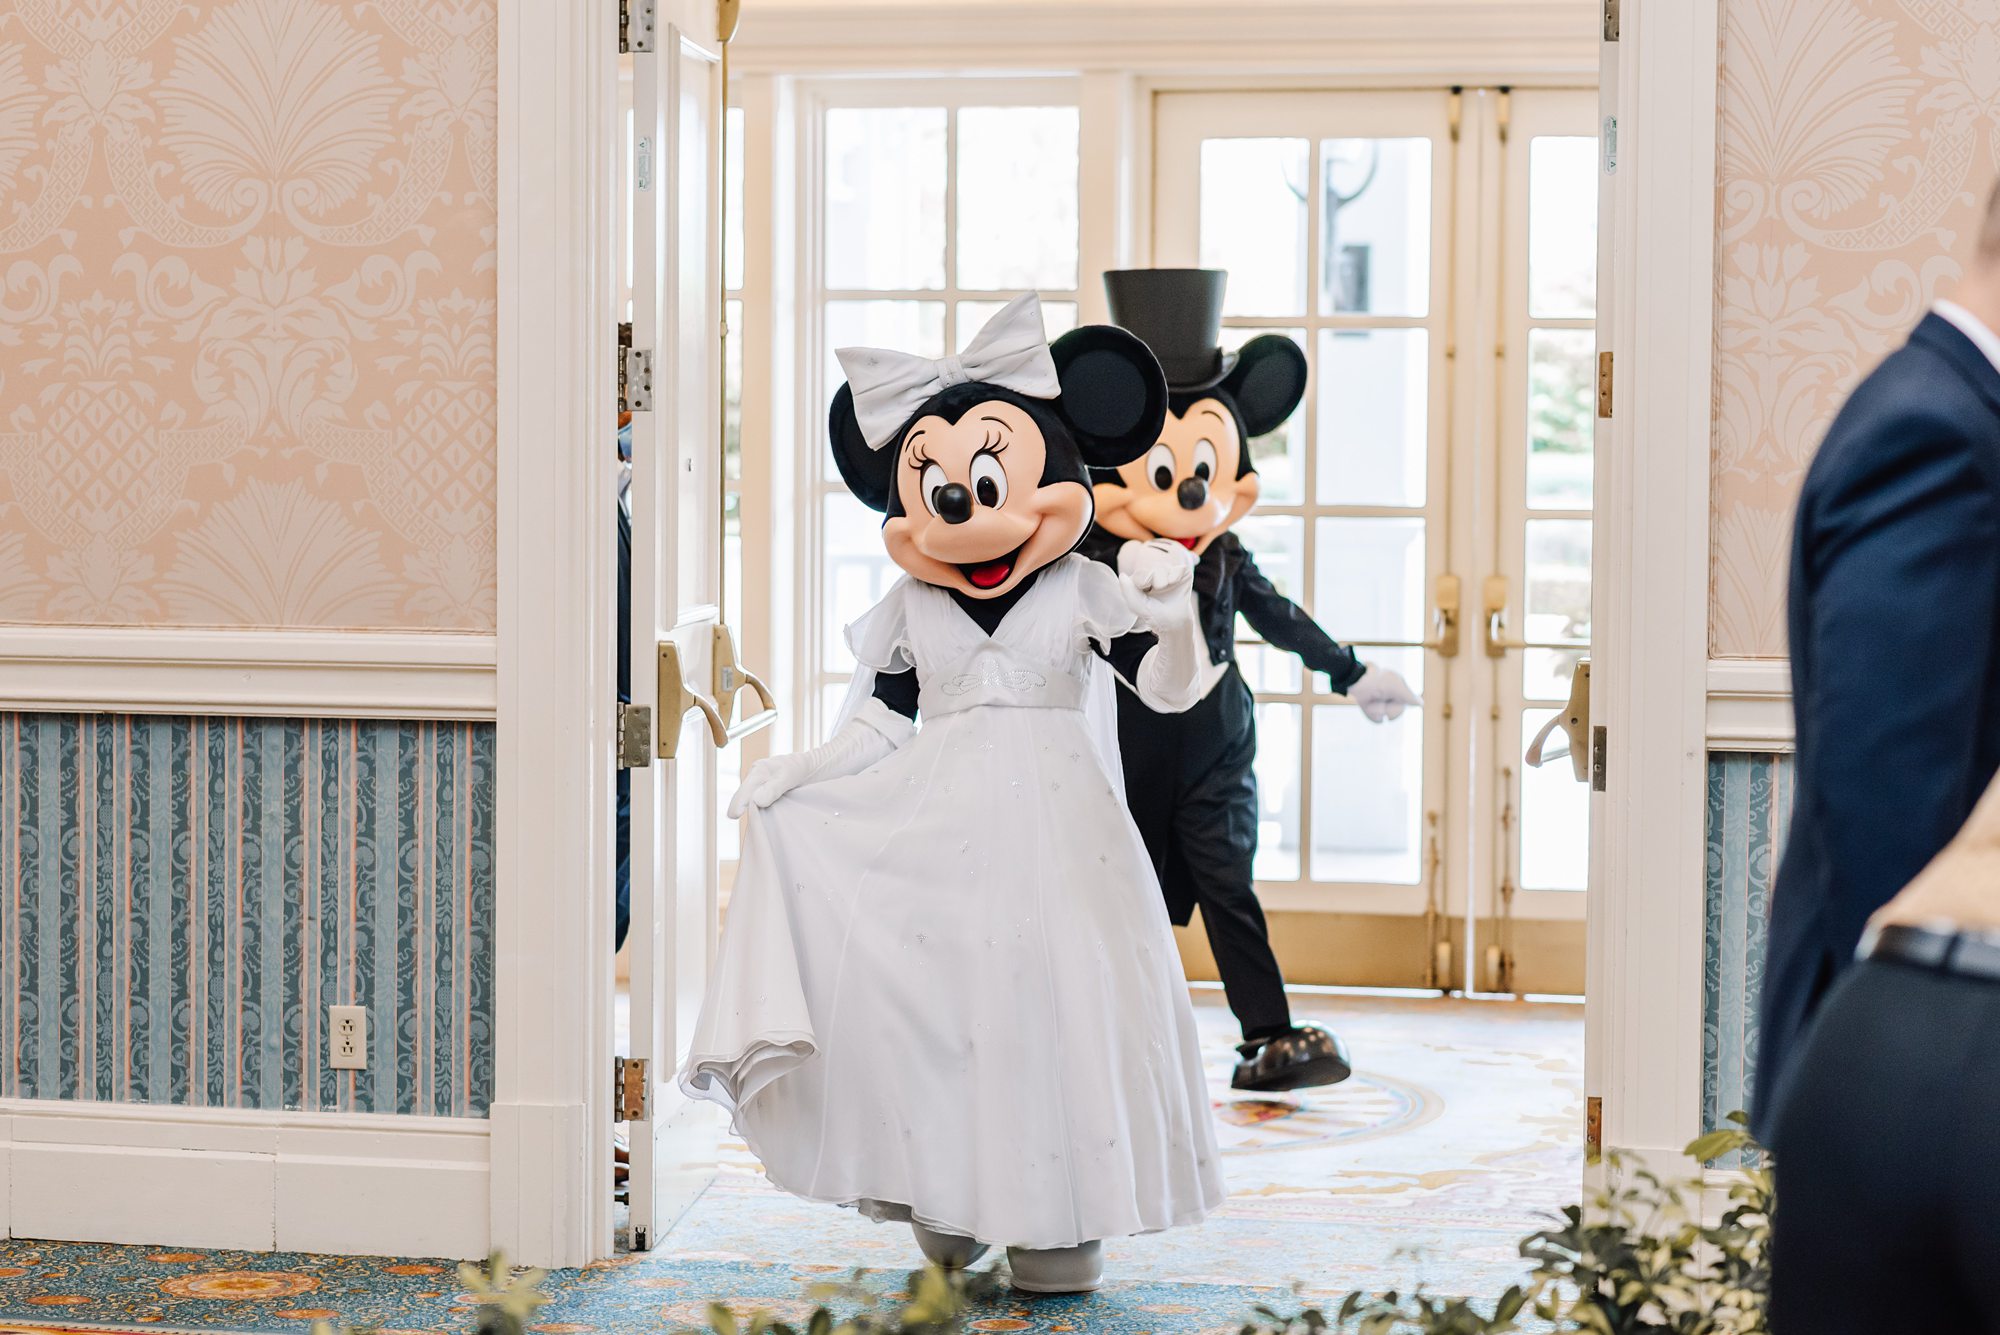 Minnie and Mickey Mouse at disney grand Floridian wedding